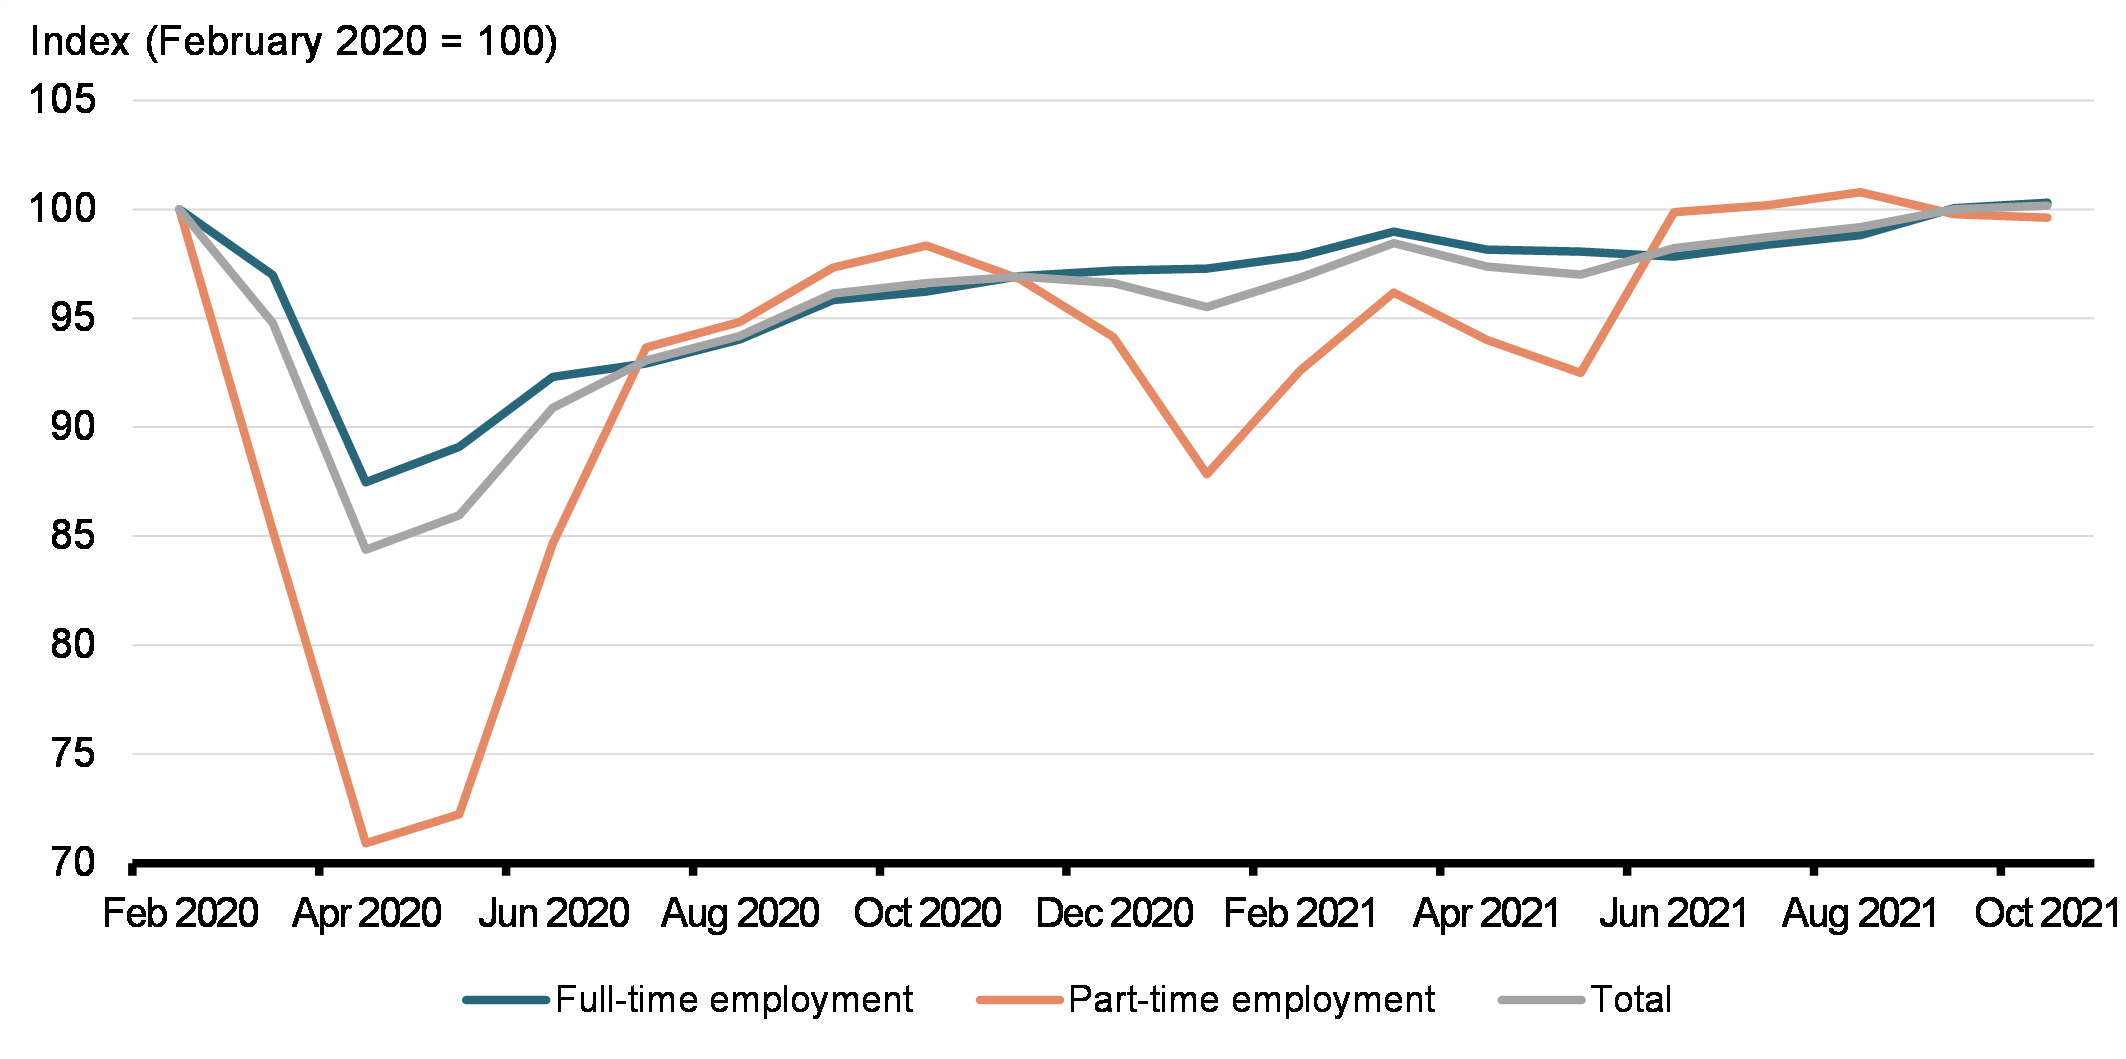 Chart 1: Total, Full-Time, and Part-Time Employment, February 2020 to October 2021